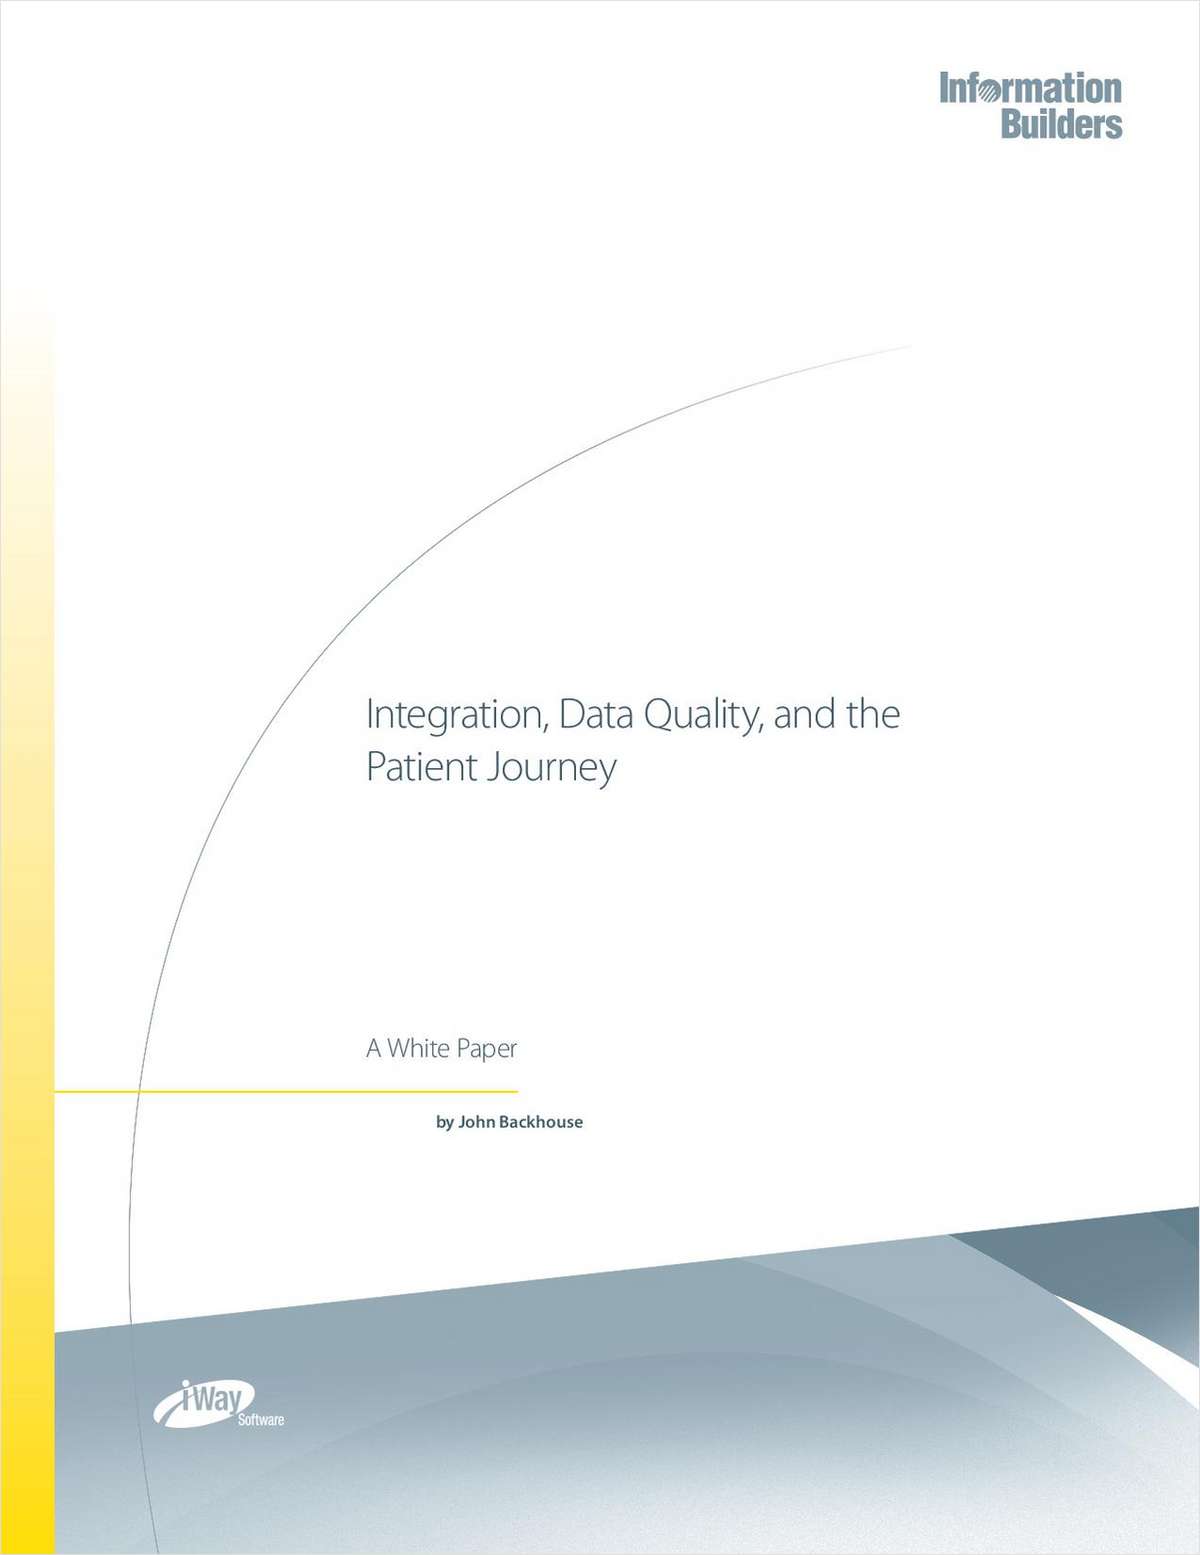 Integration, Data Quality, and the Patient Journey